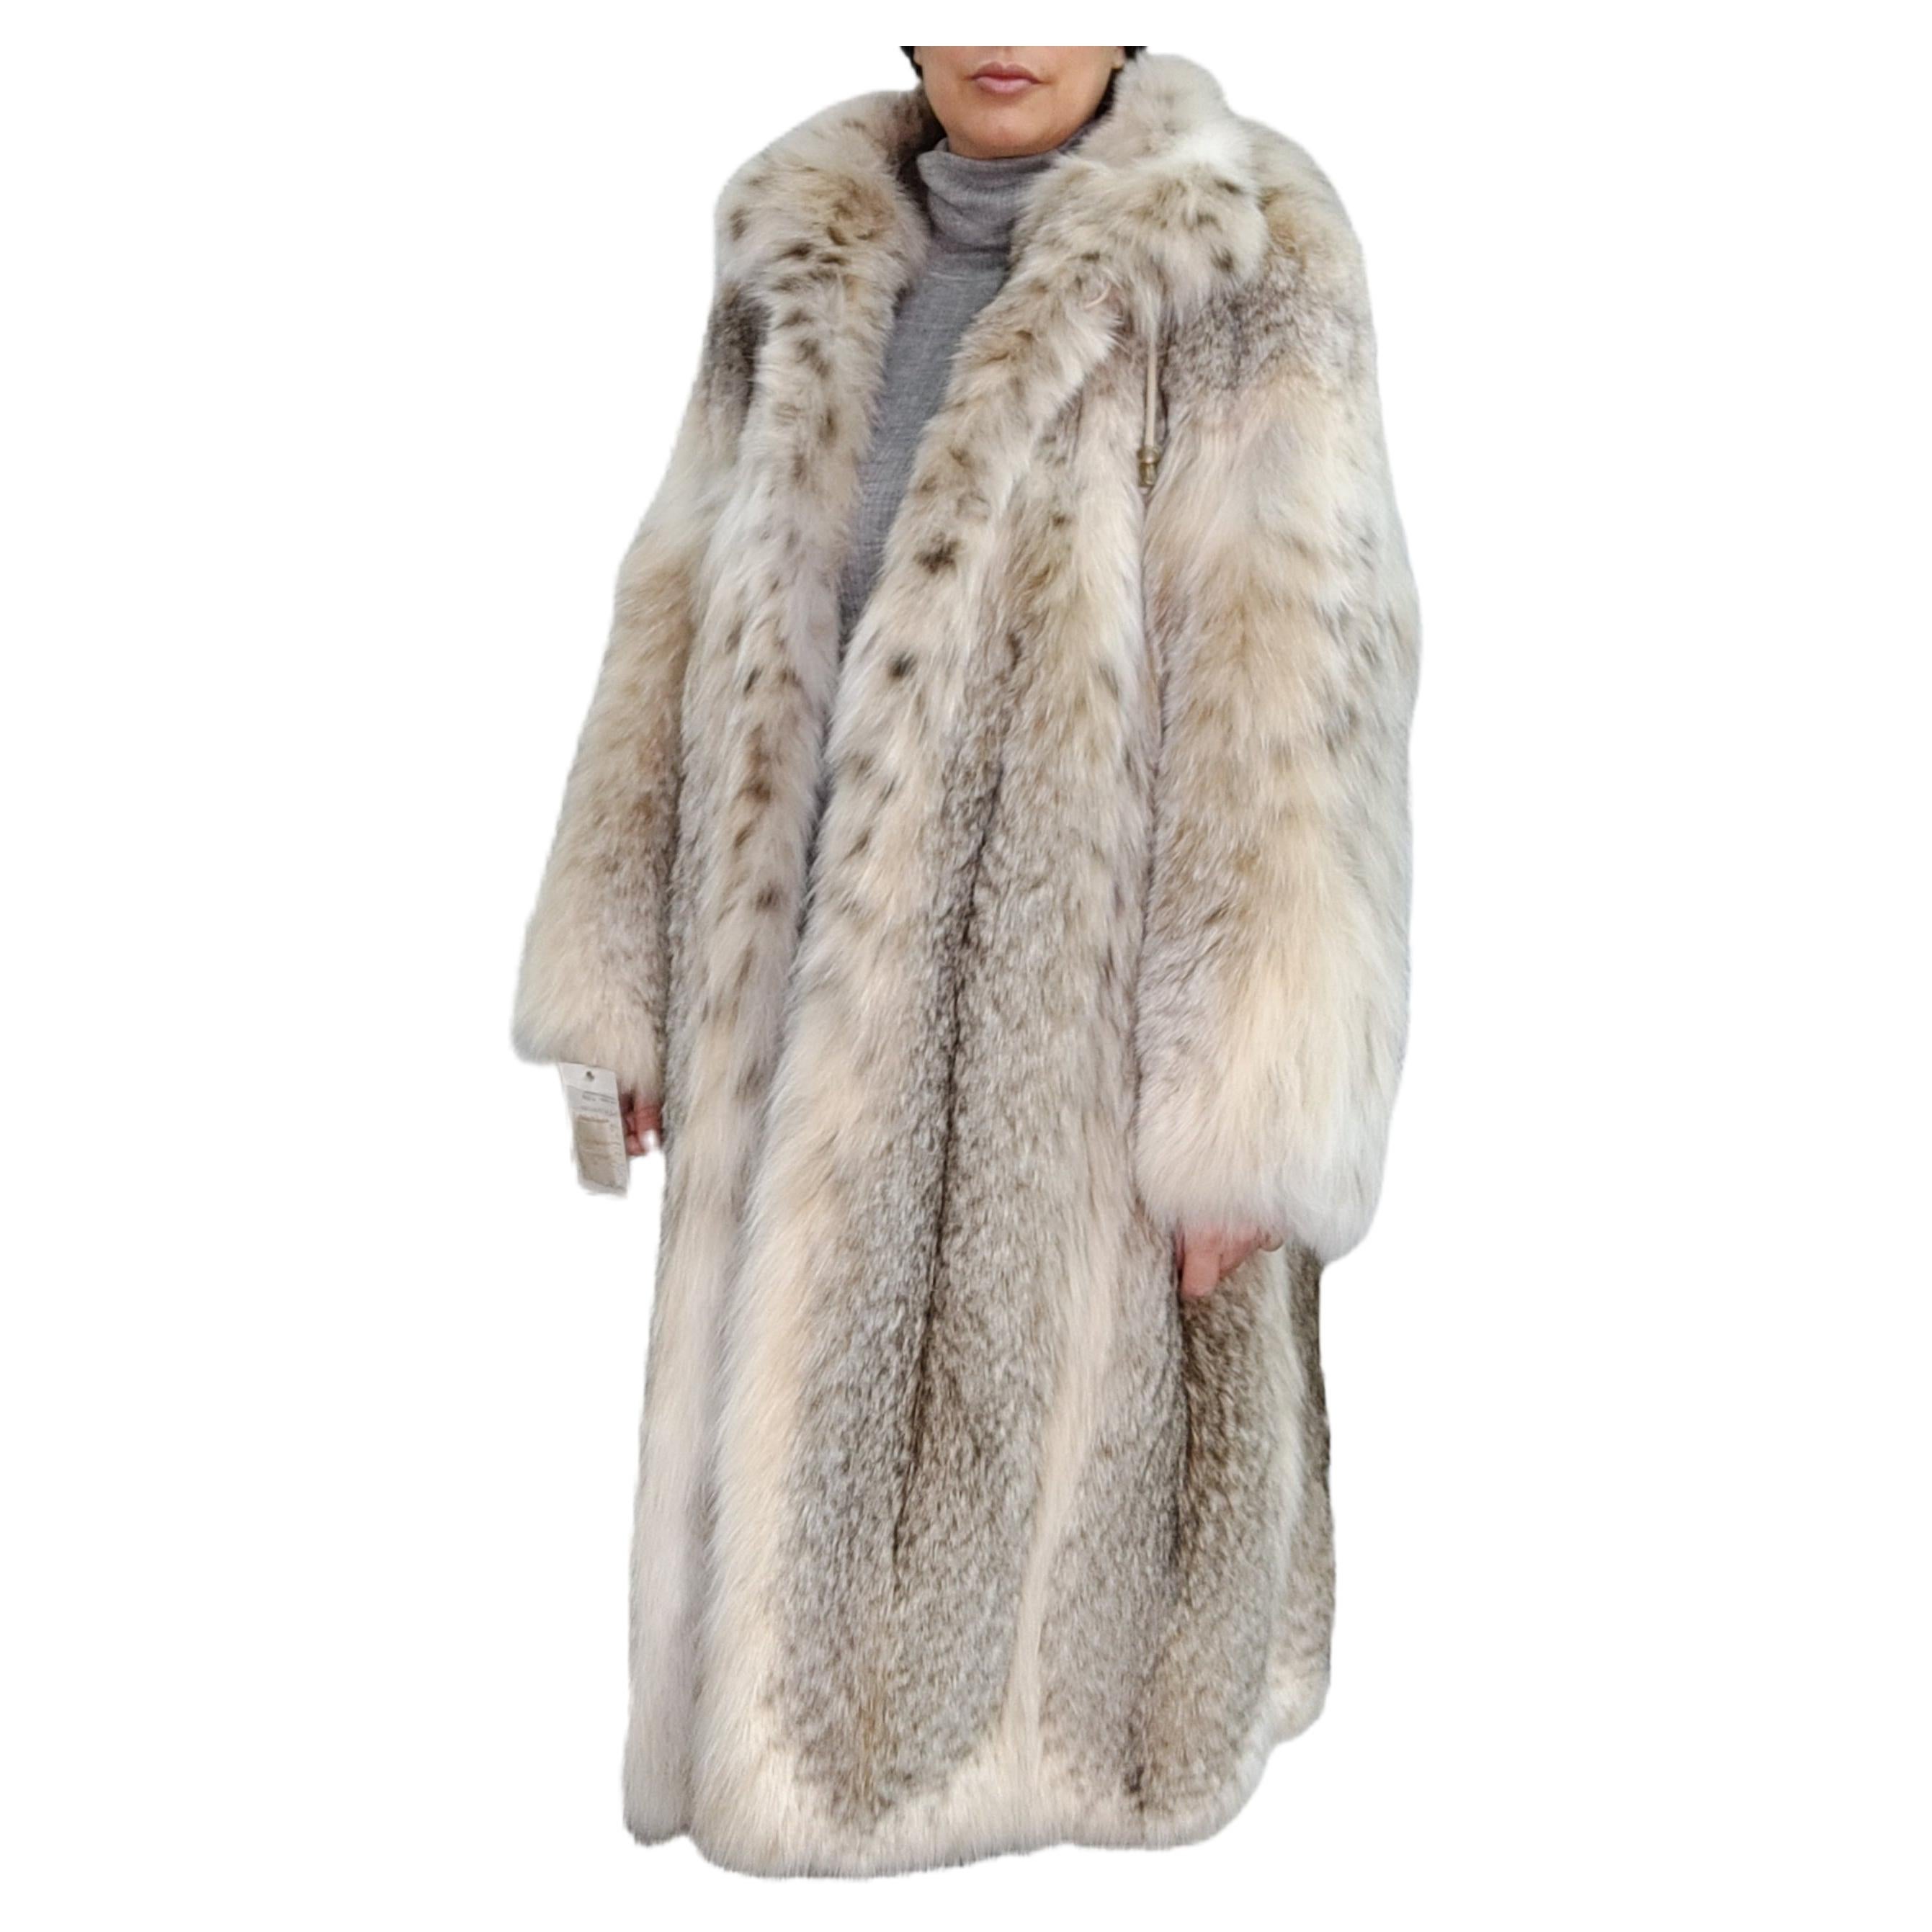 Brand new lightweight lynx fur coat with detachable hood size 14 L For Sale